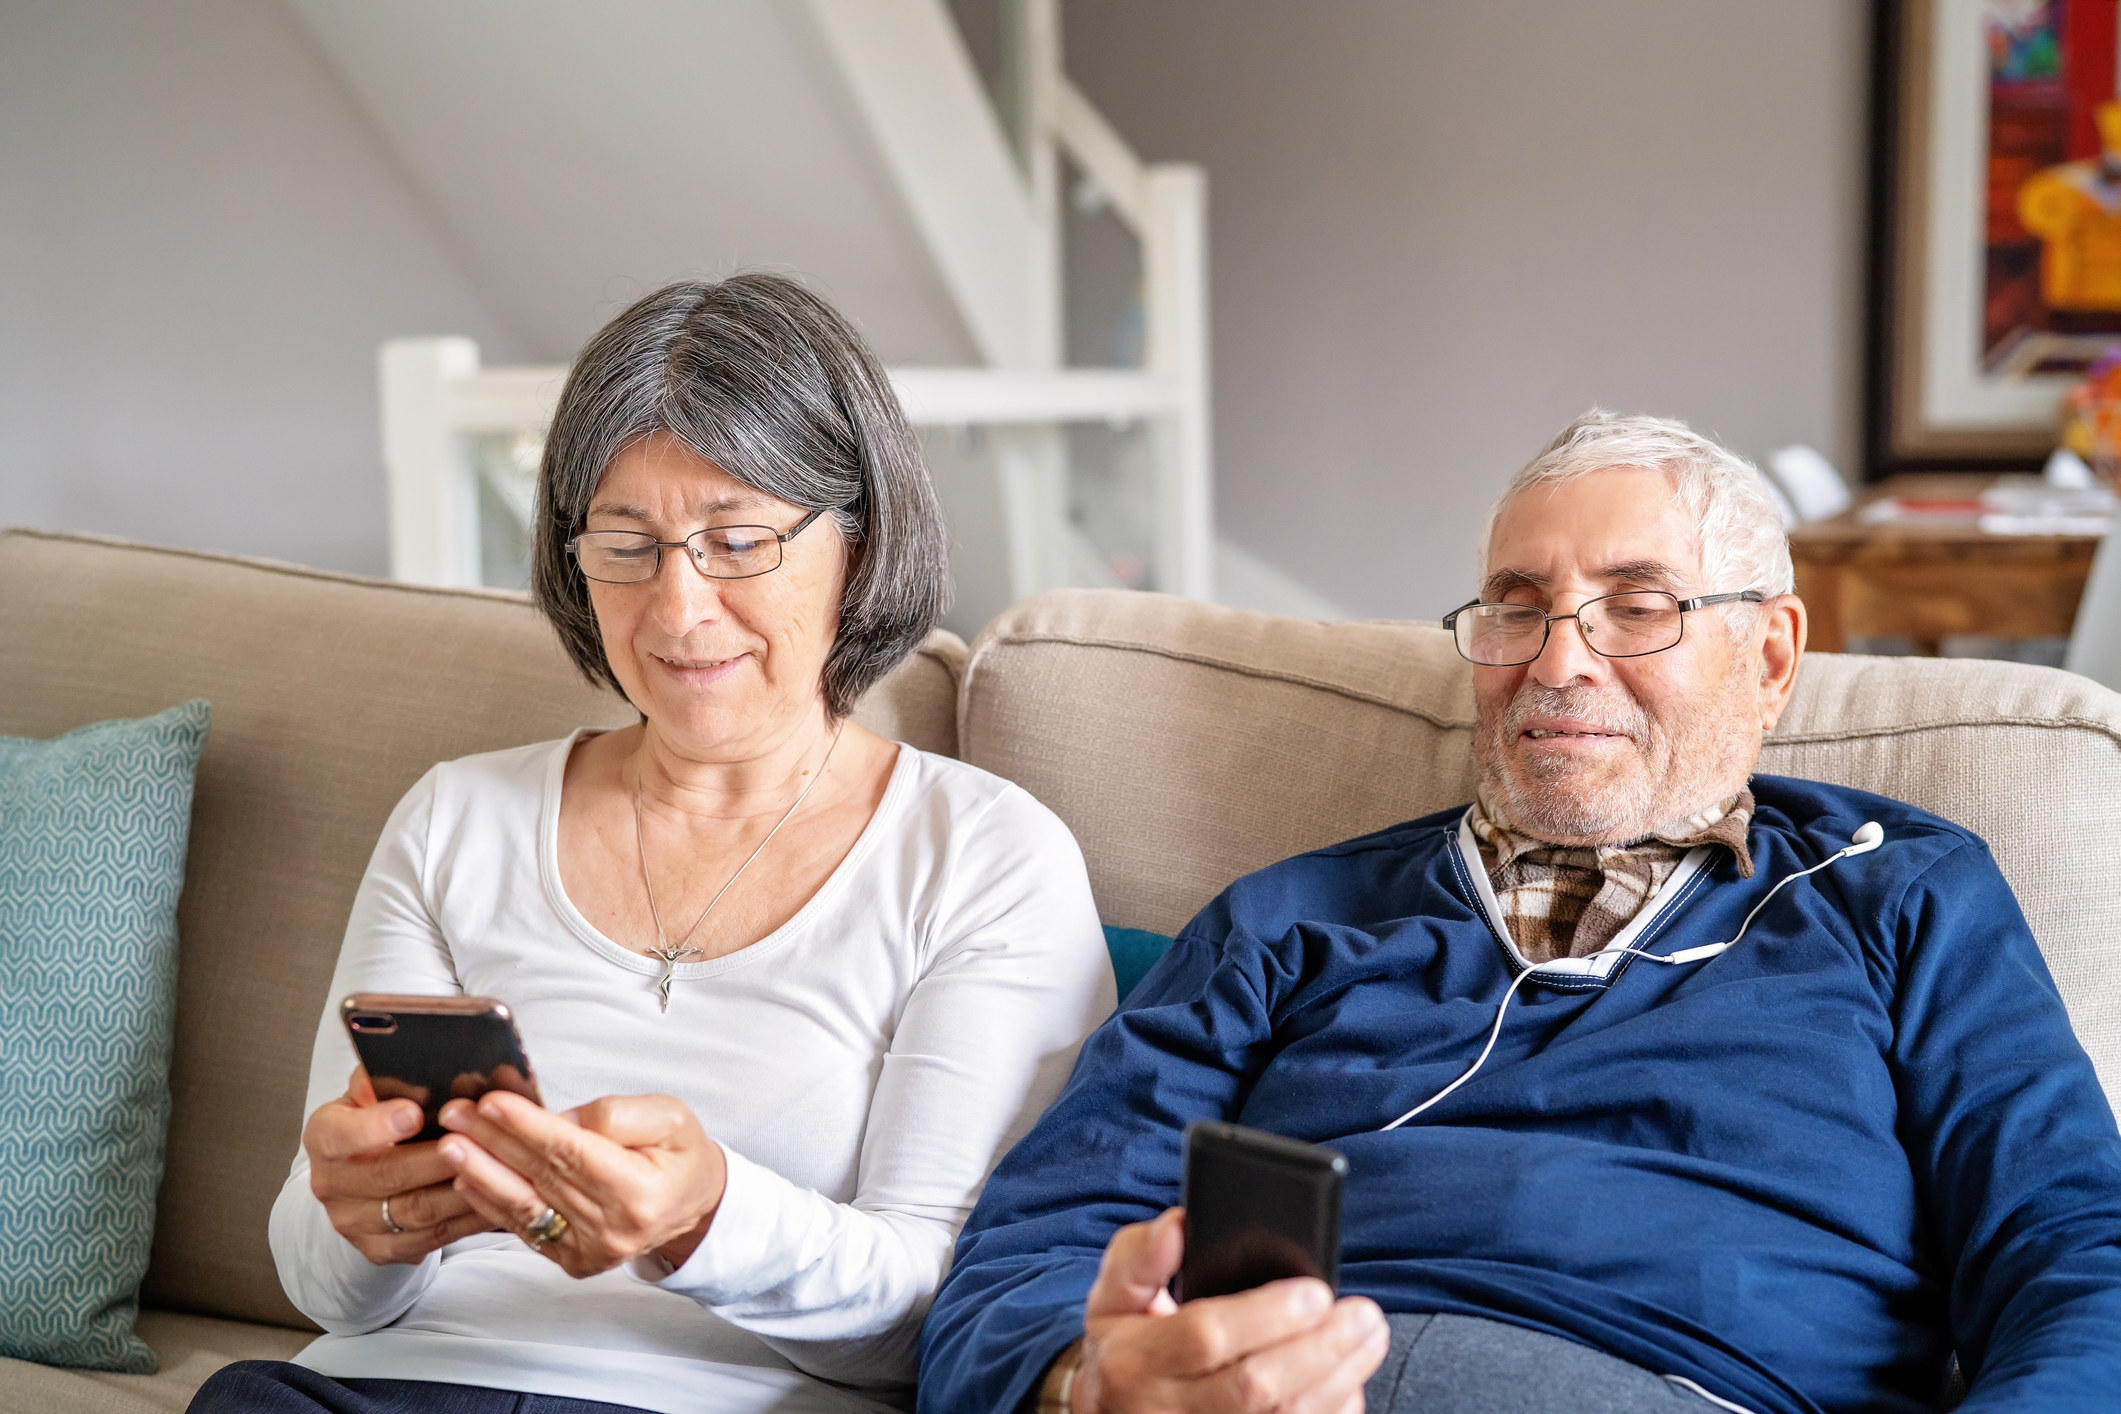 Older woman and man sitting on a couch smiling and looking at their cellphones